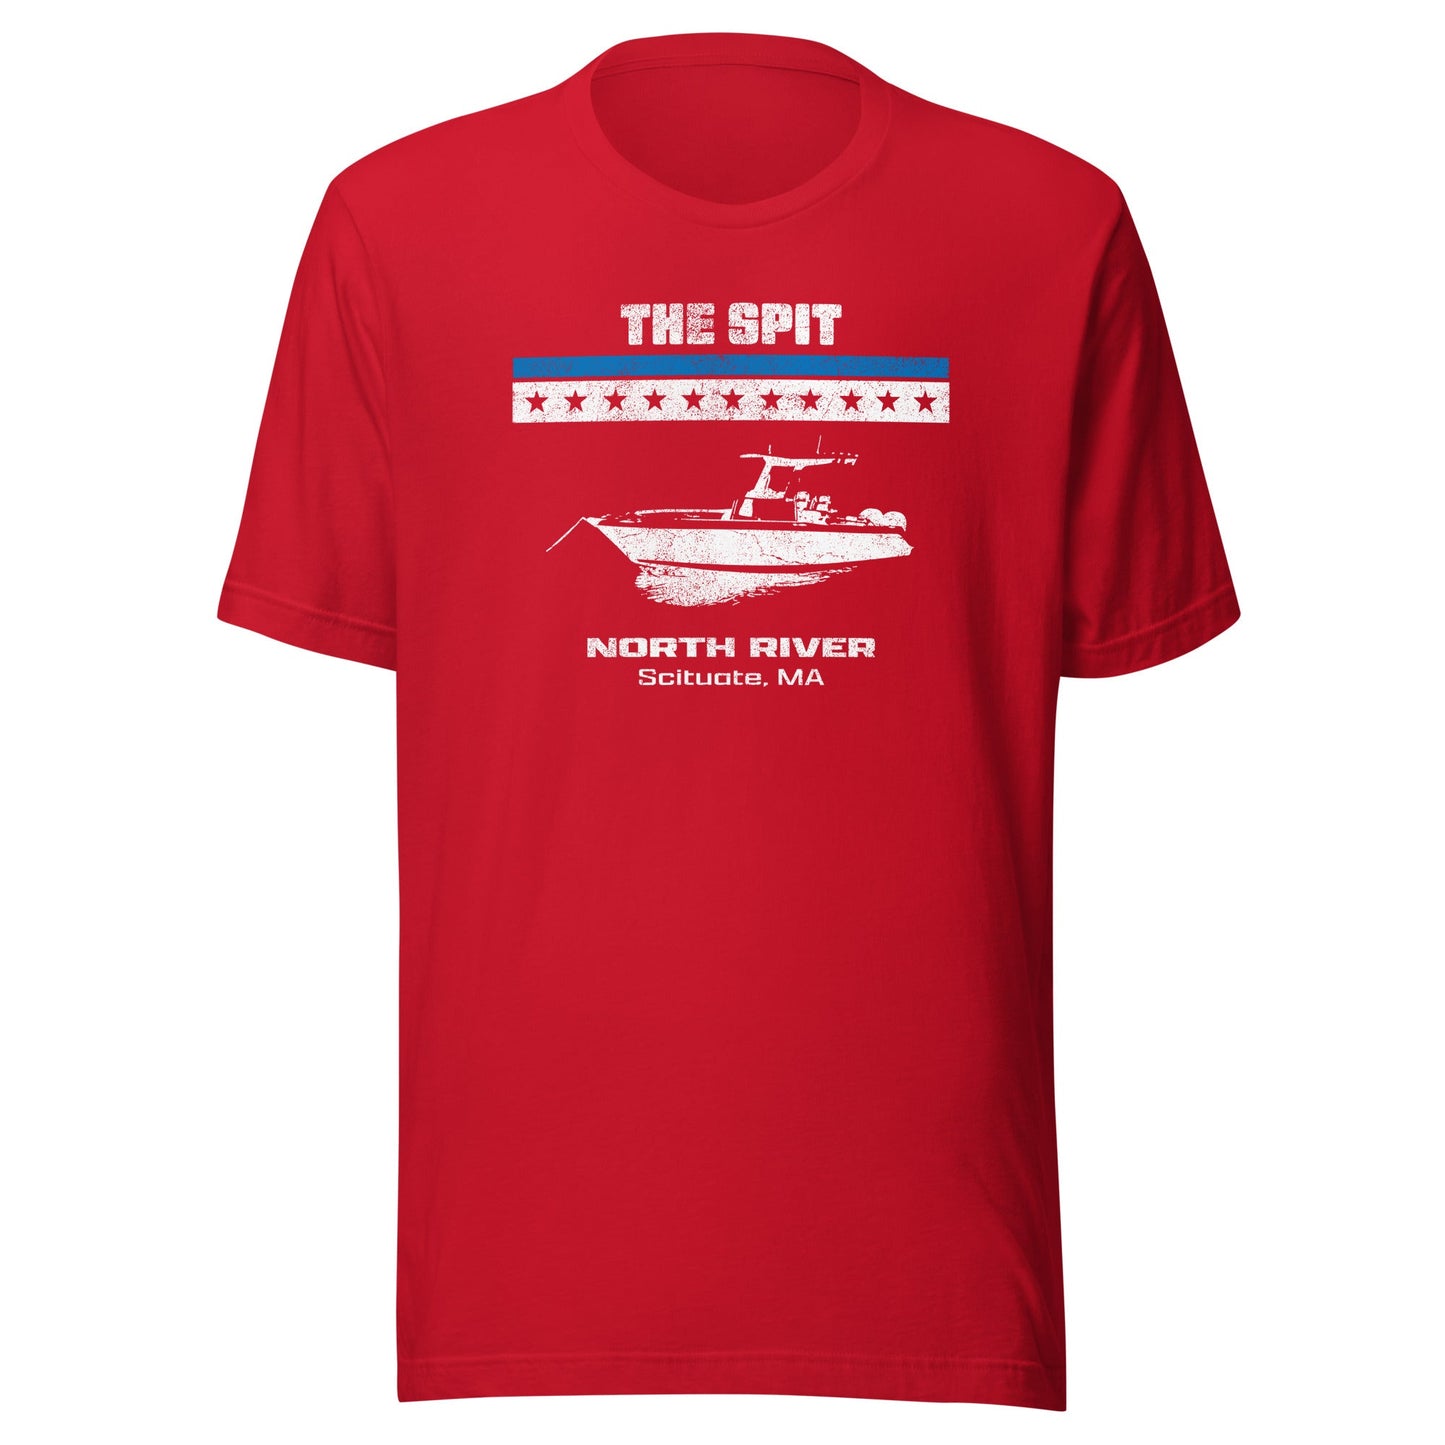 "The Spit" North River T Shirt - Scituate, MA | Mens & Womens Patriotic Summer Tee